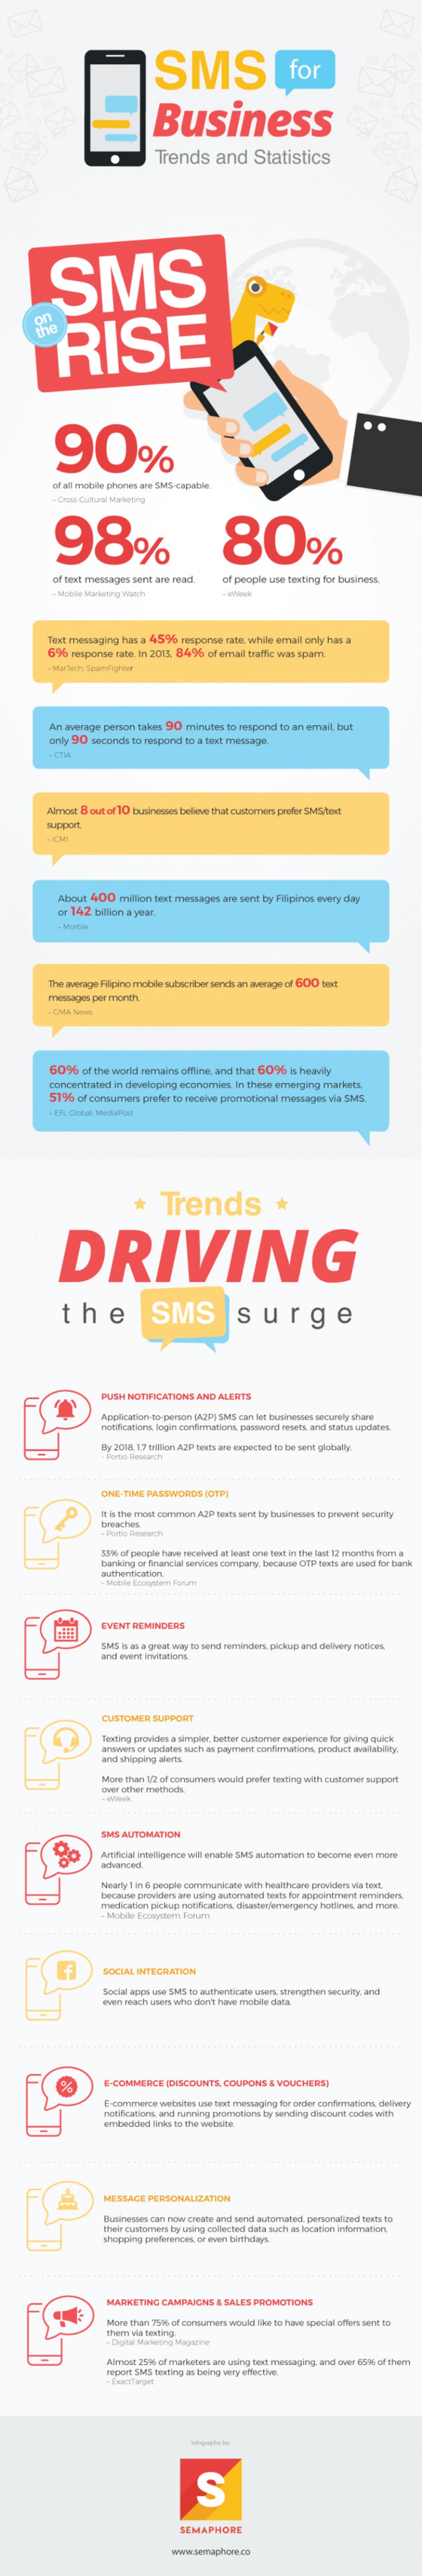 SMS Is on the Rise for Business: Trends and Stats [Infographic] - MarketingProfs | The MarTech Digest | Scoop.it